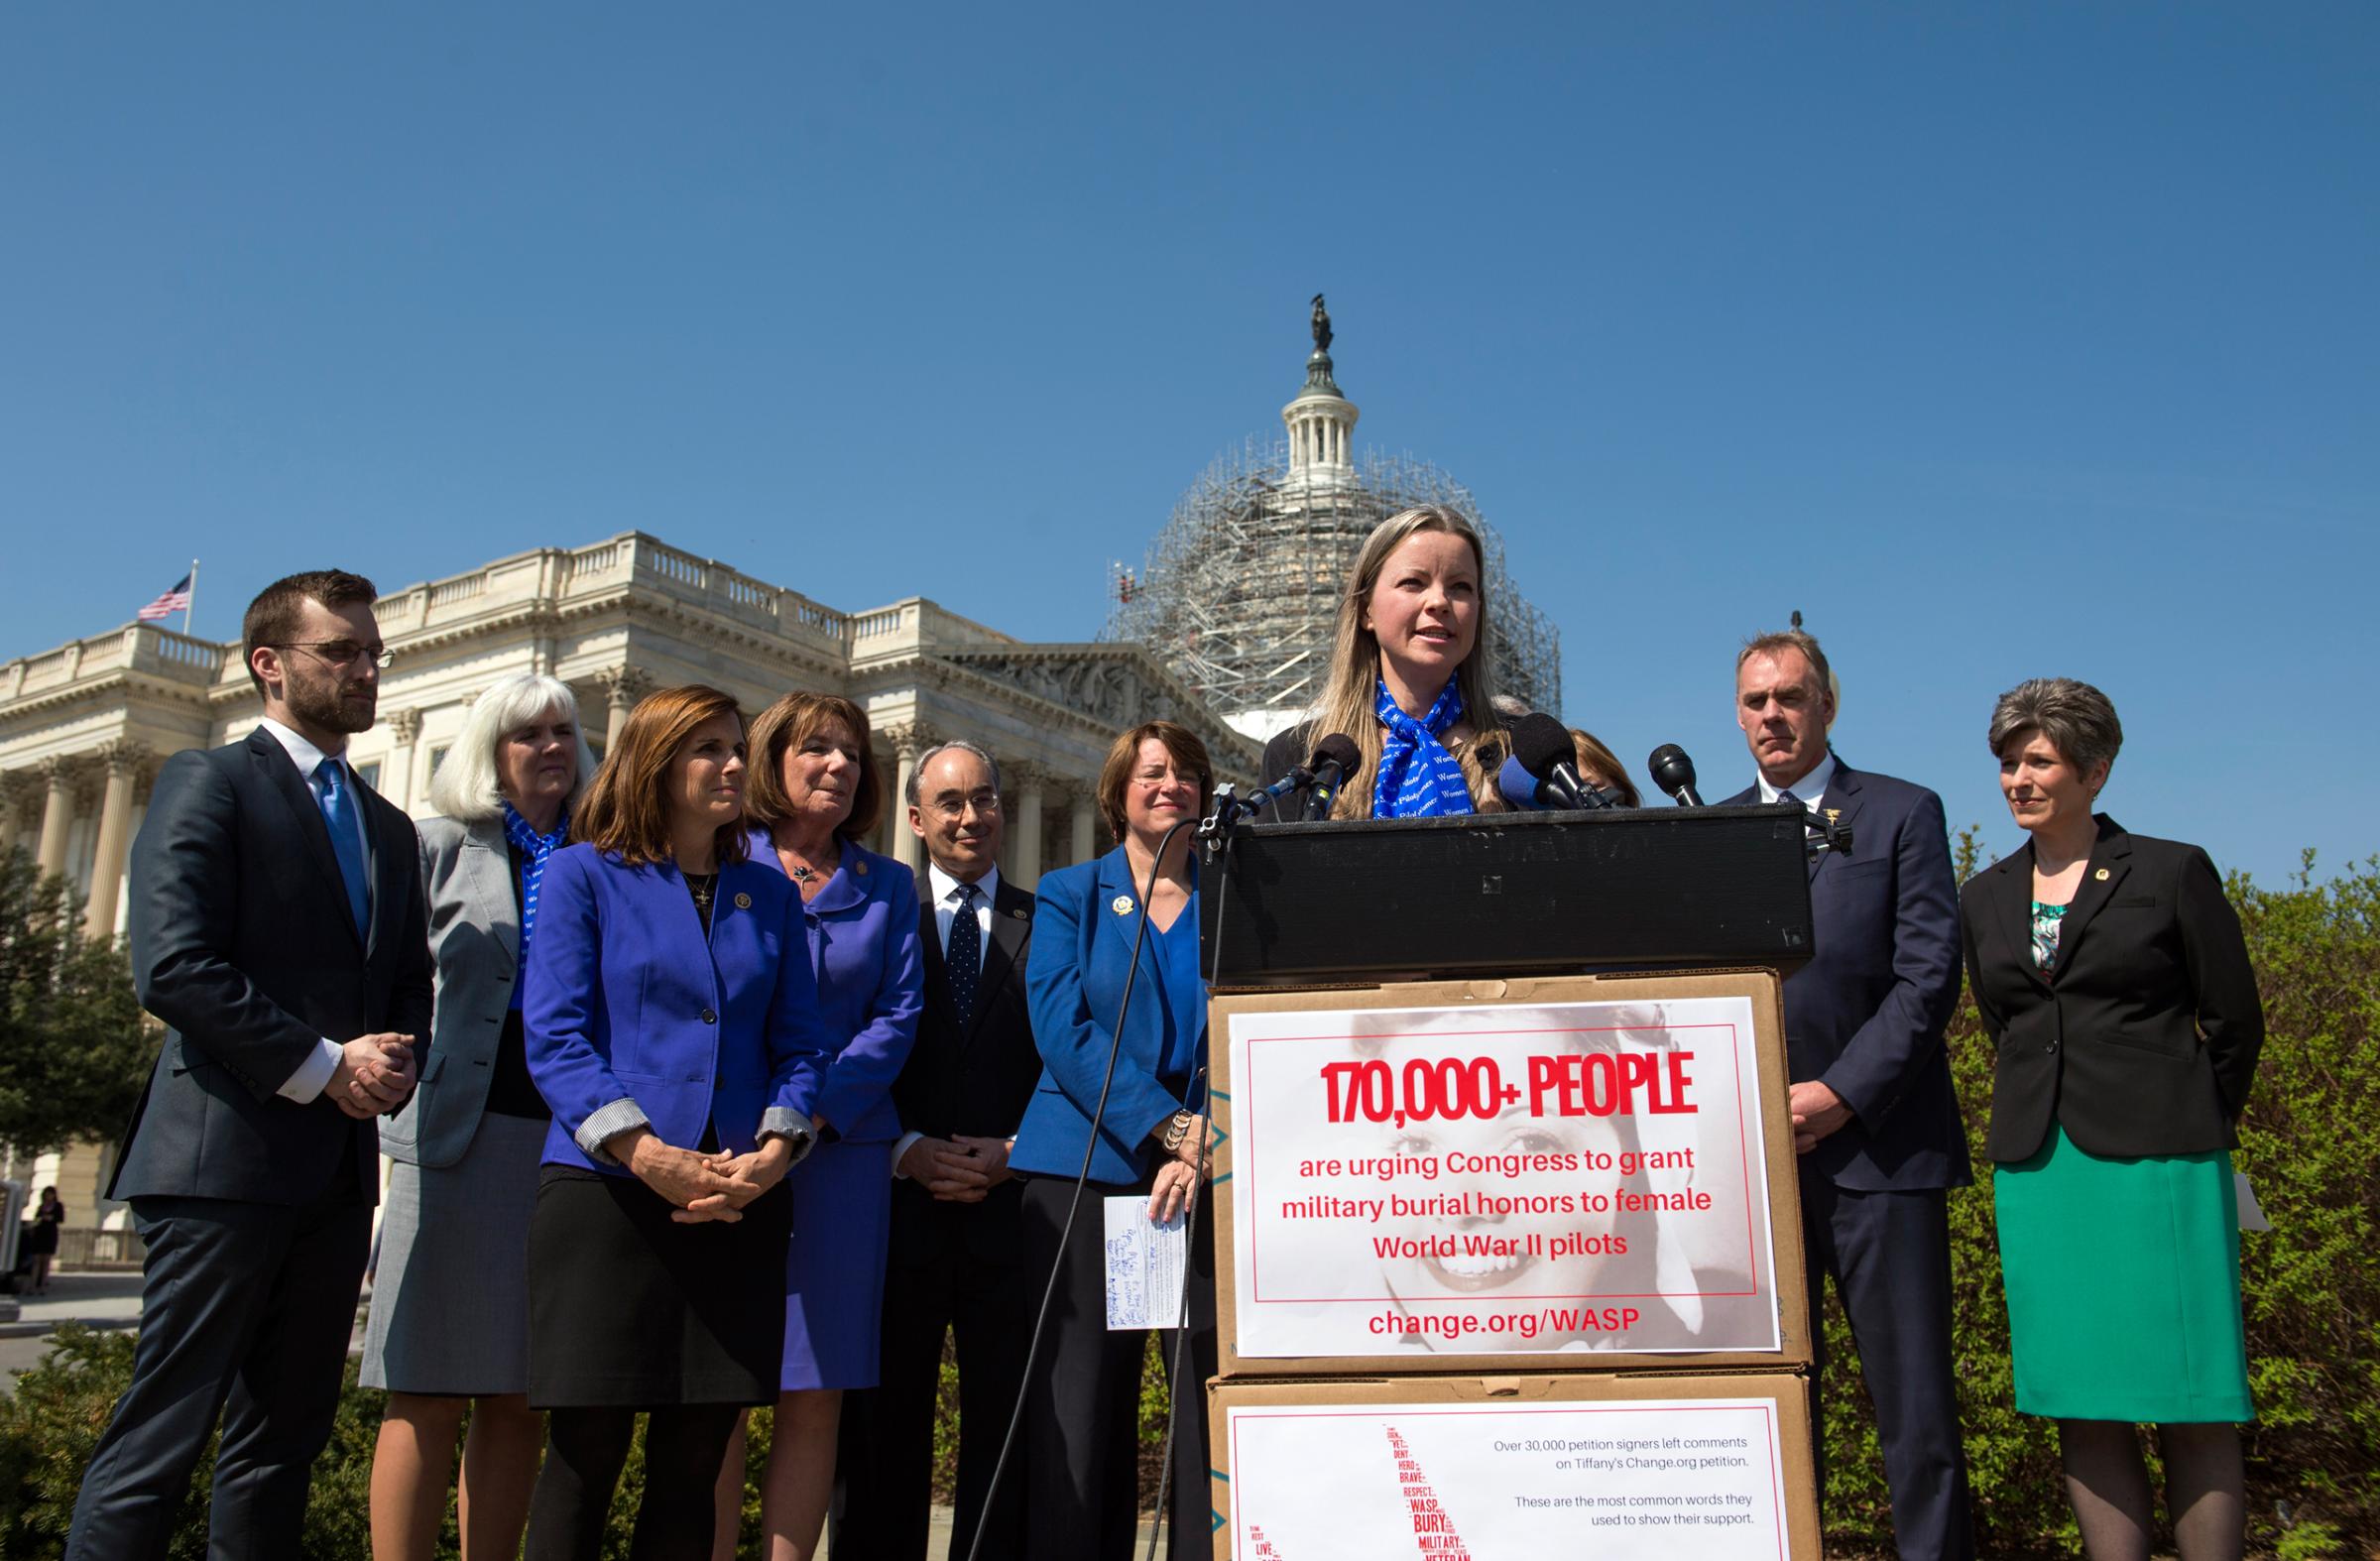 Erin Miller, granddaughter of WWII veteran WASP (Women Airforce Service Pilots), Elaine Harmon, speaks during an event with members of congress on the reinstatement of WWII female pilots at Arlington National Cemetery on Capitol Hill in Washington, Wednesday, March 16, 2016. Arlington National Cemetery approved in 2002 active duty designees, including WASP pilots, for military honors and inurnments. However, in March 2015, then-Secretary of the Army John McHugh reversed this decision. (AP Photo/Molly Riley)